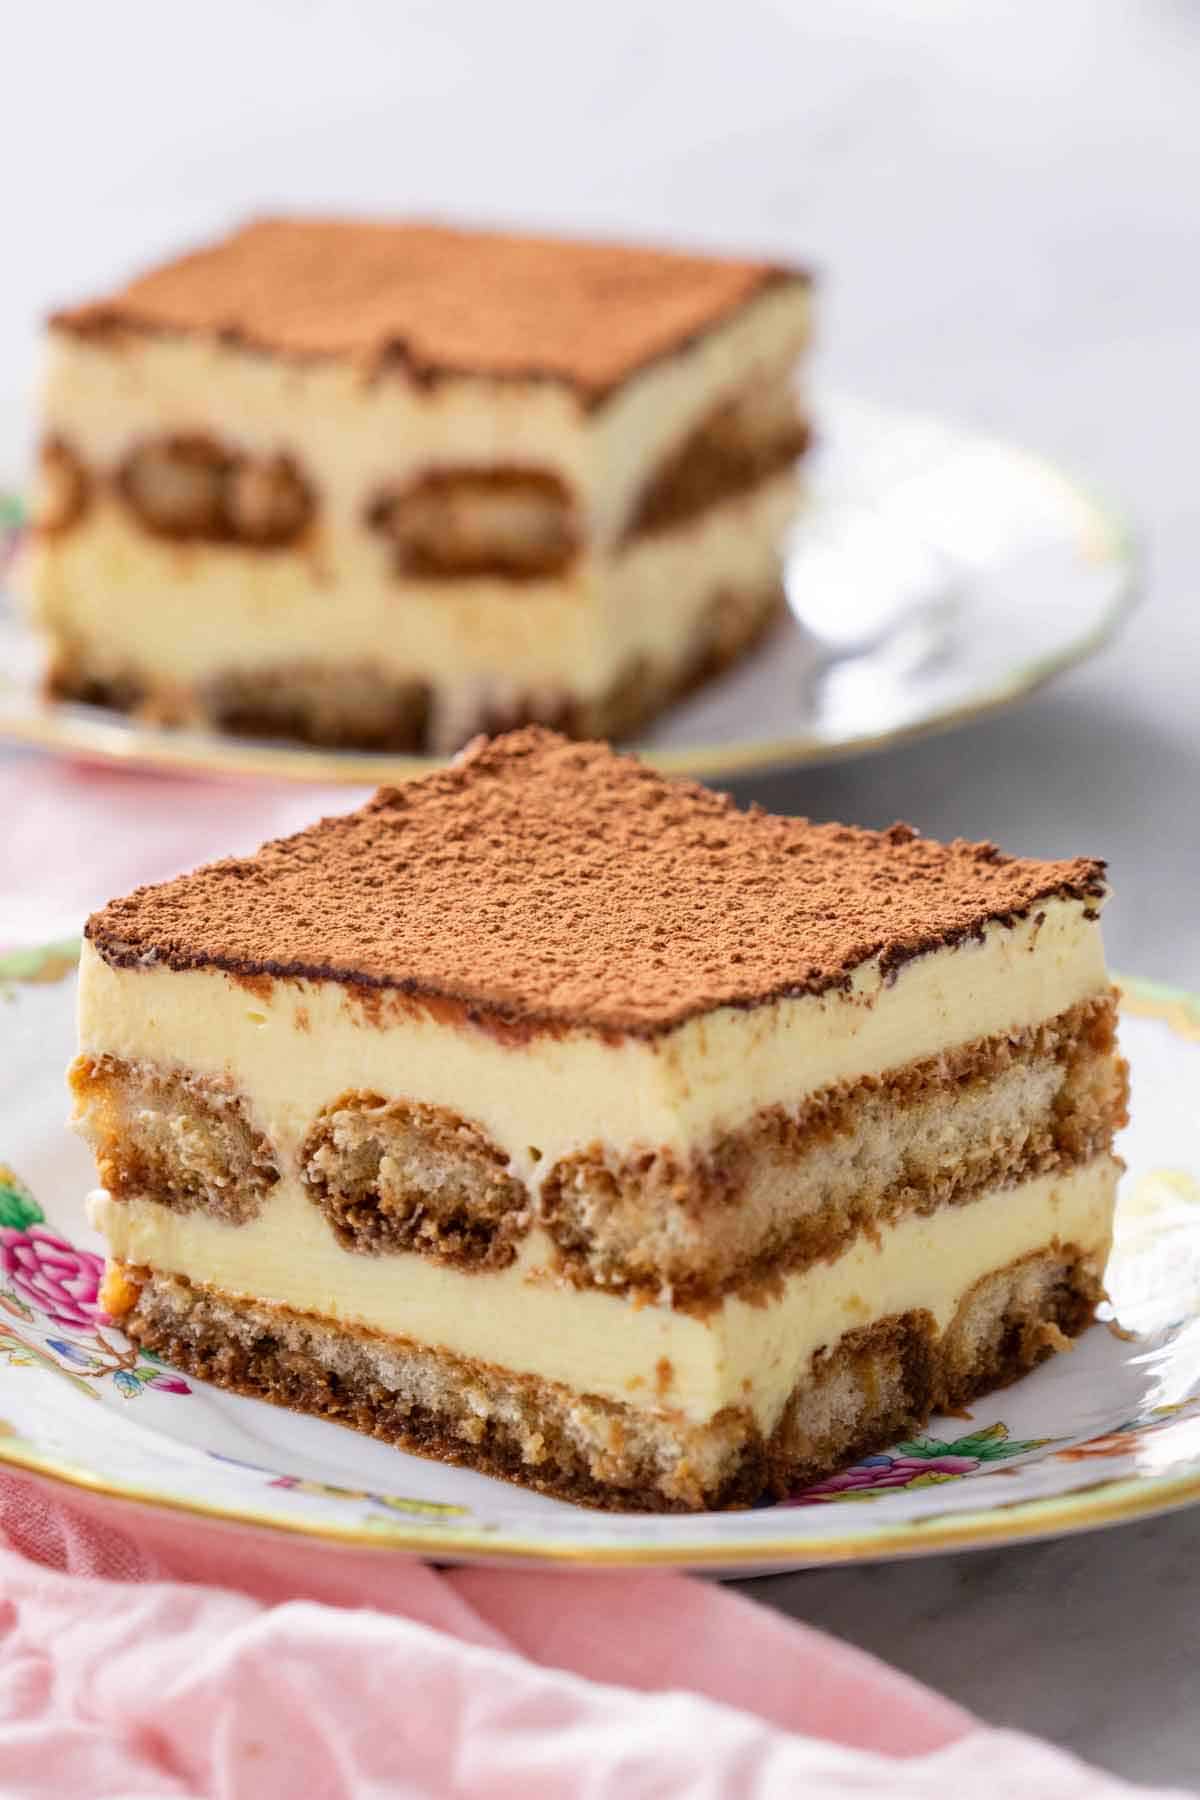 A profile view showing the layers of tiramisu on a plate. A second piece of tiramisu in the background.